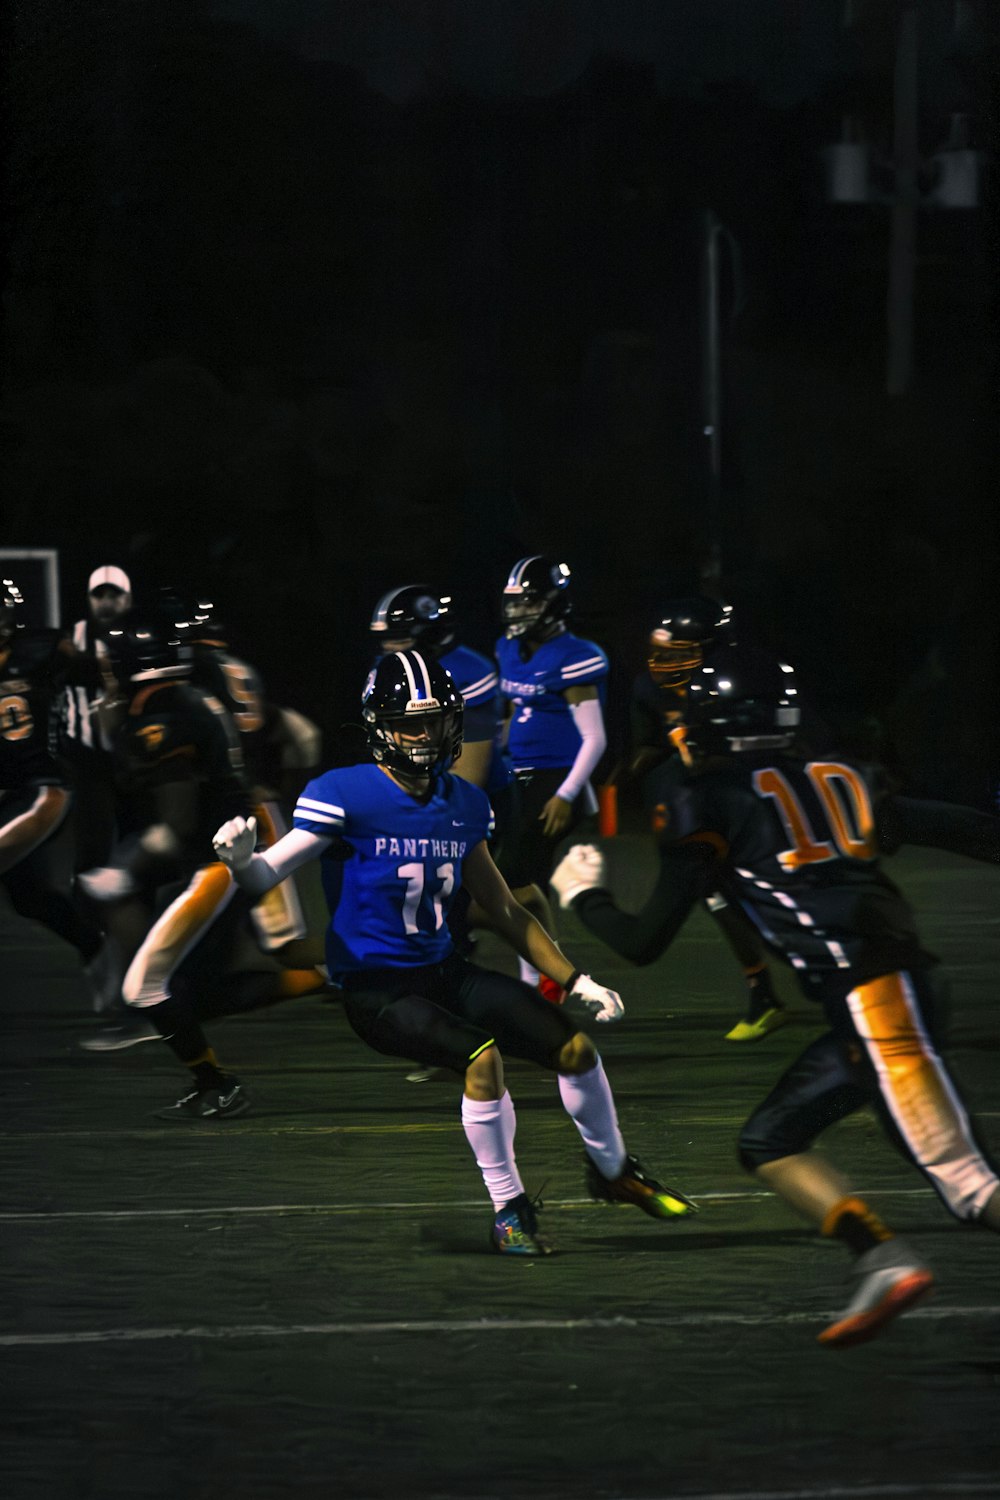 a football player running with the ball during a game